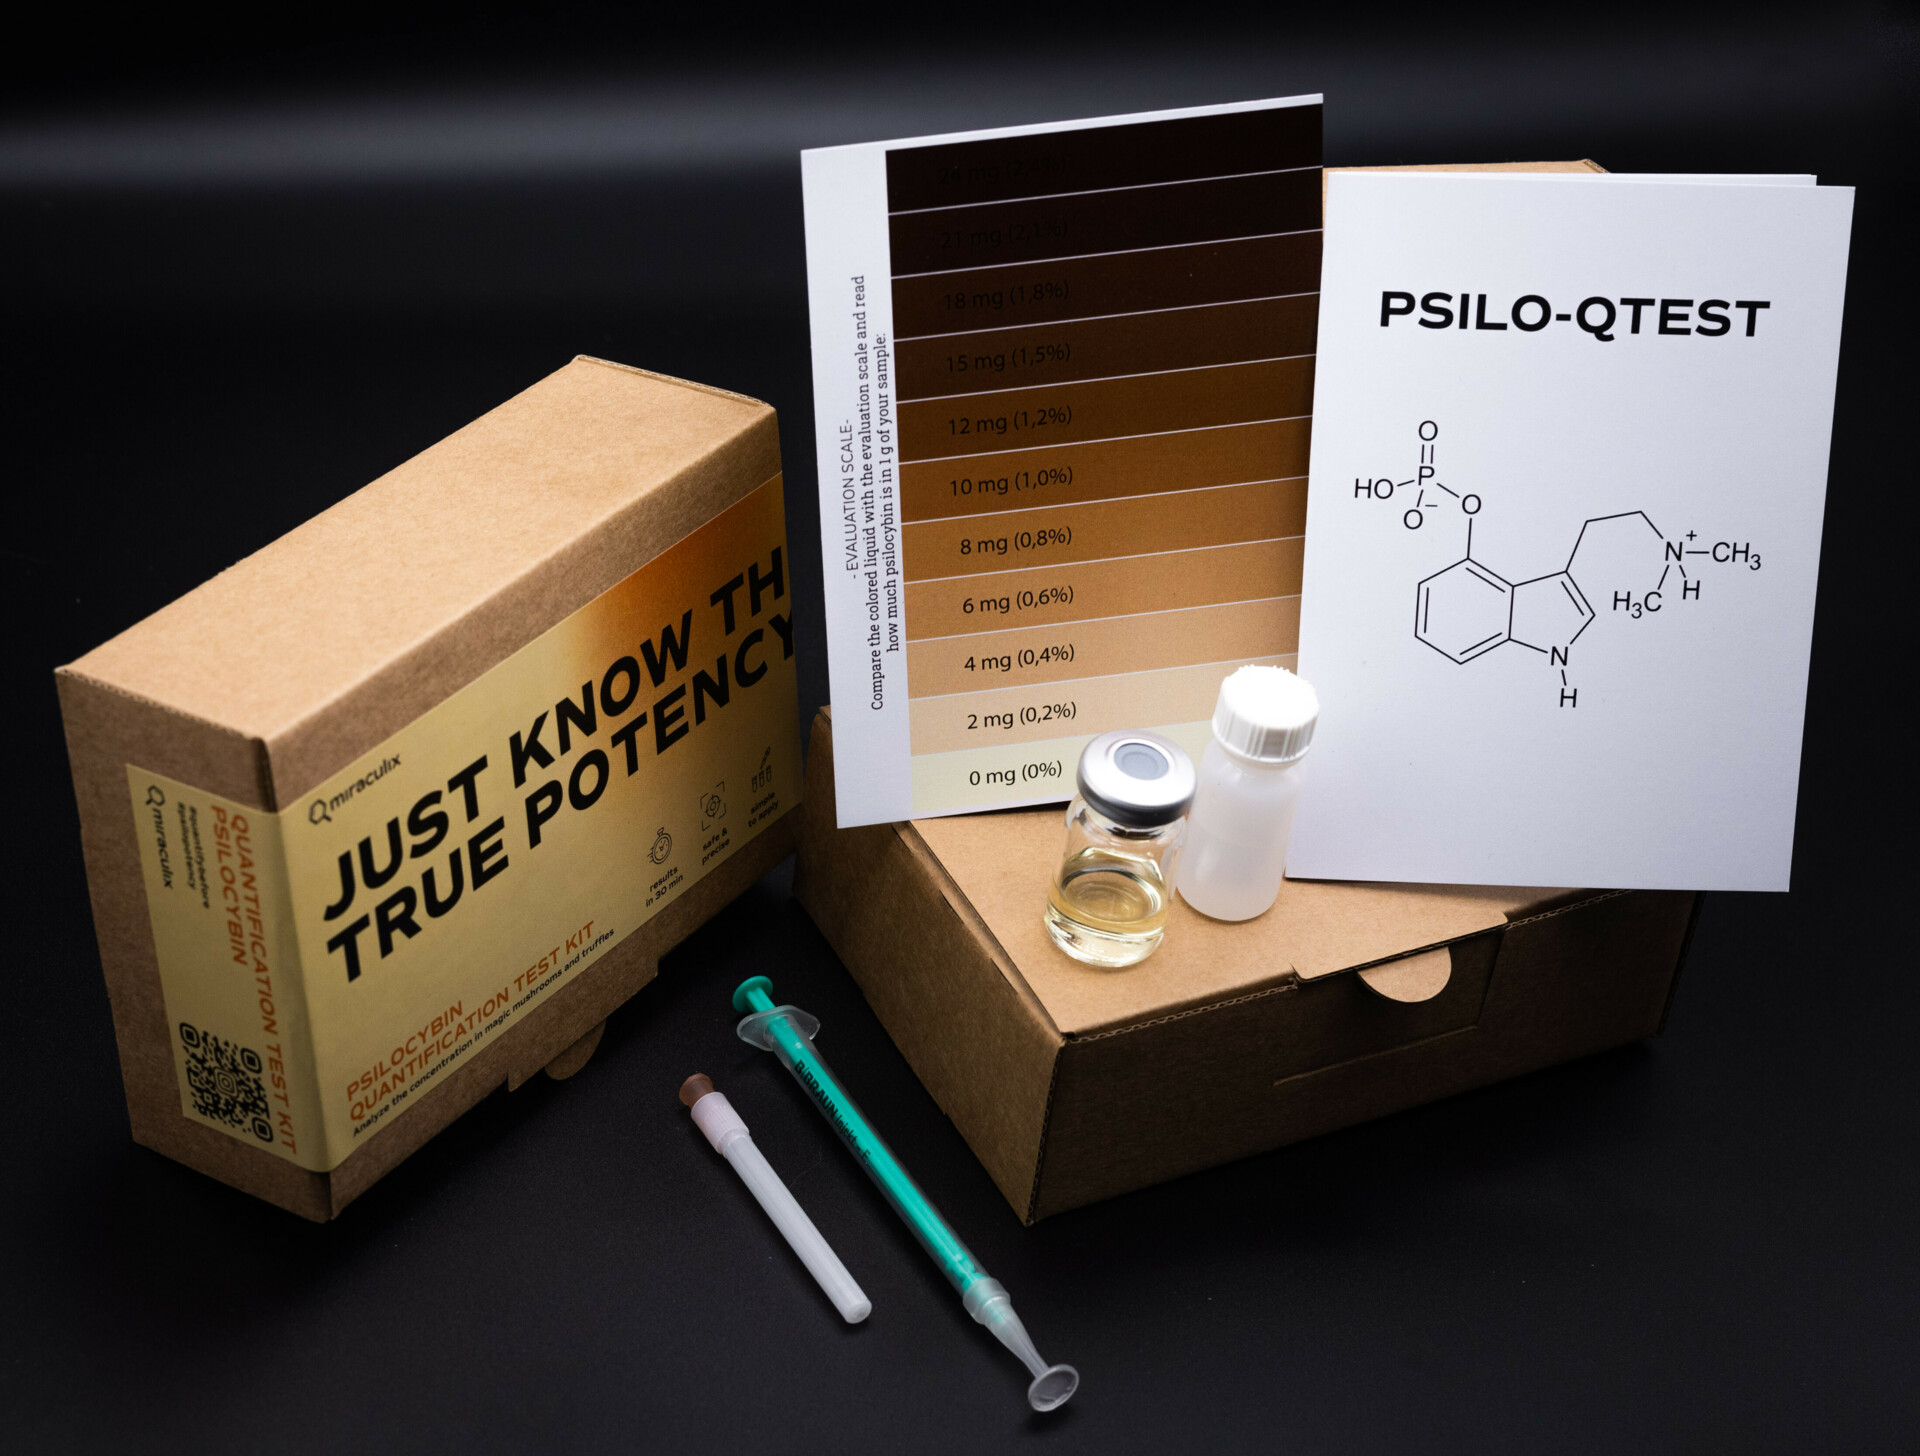 Psilocybin QTest with test utensils, instructions and evaluation scale